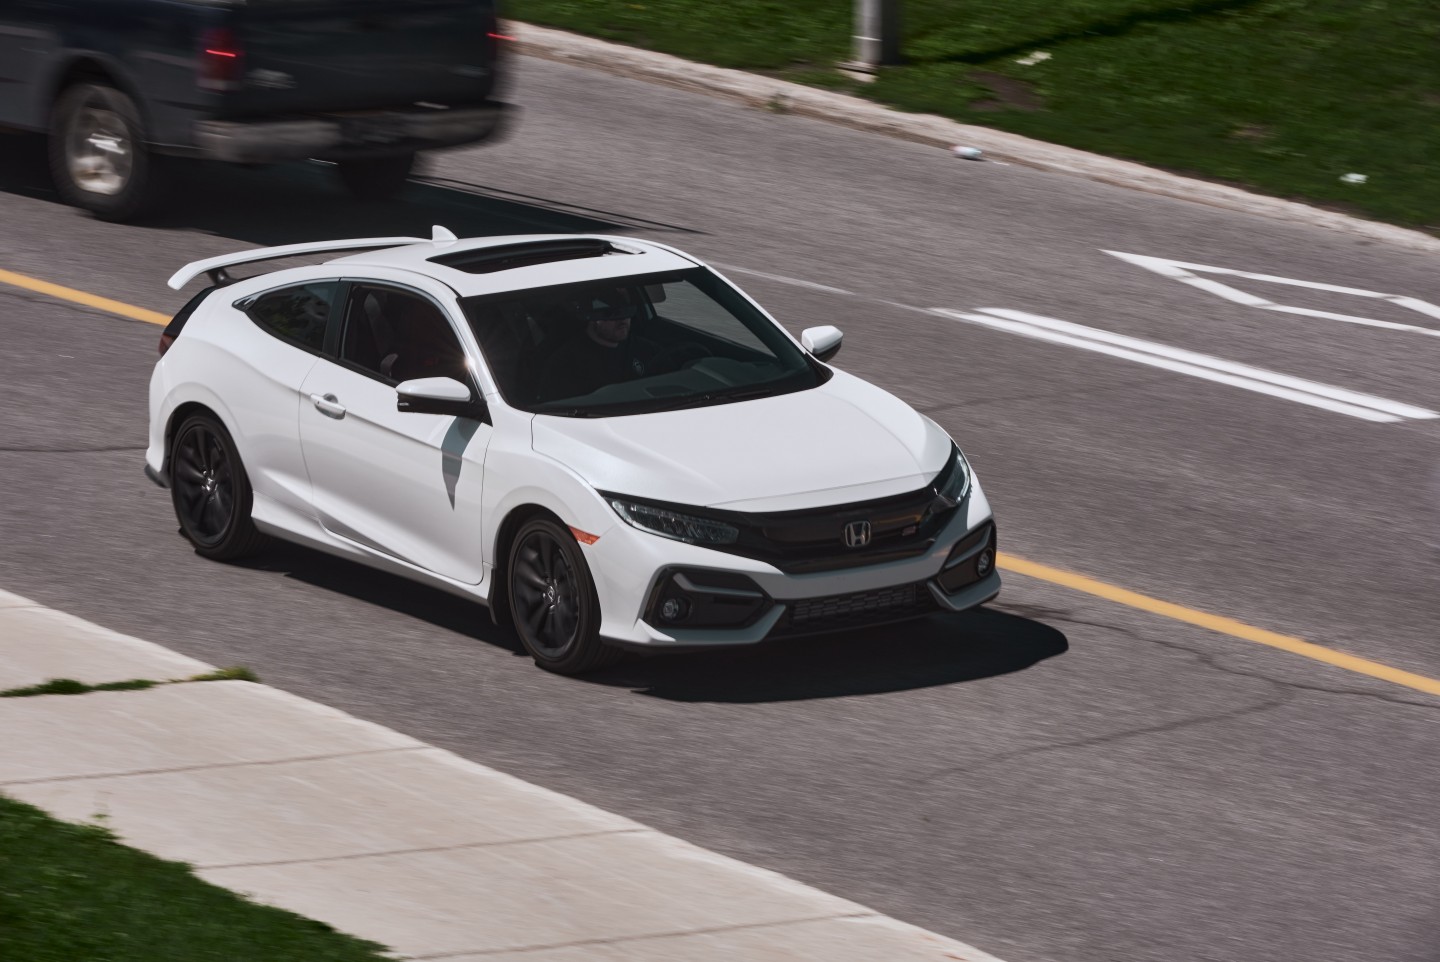 2020 Honda Civic Si Coupe driving down a road